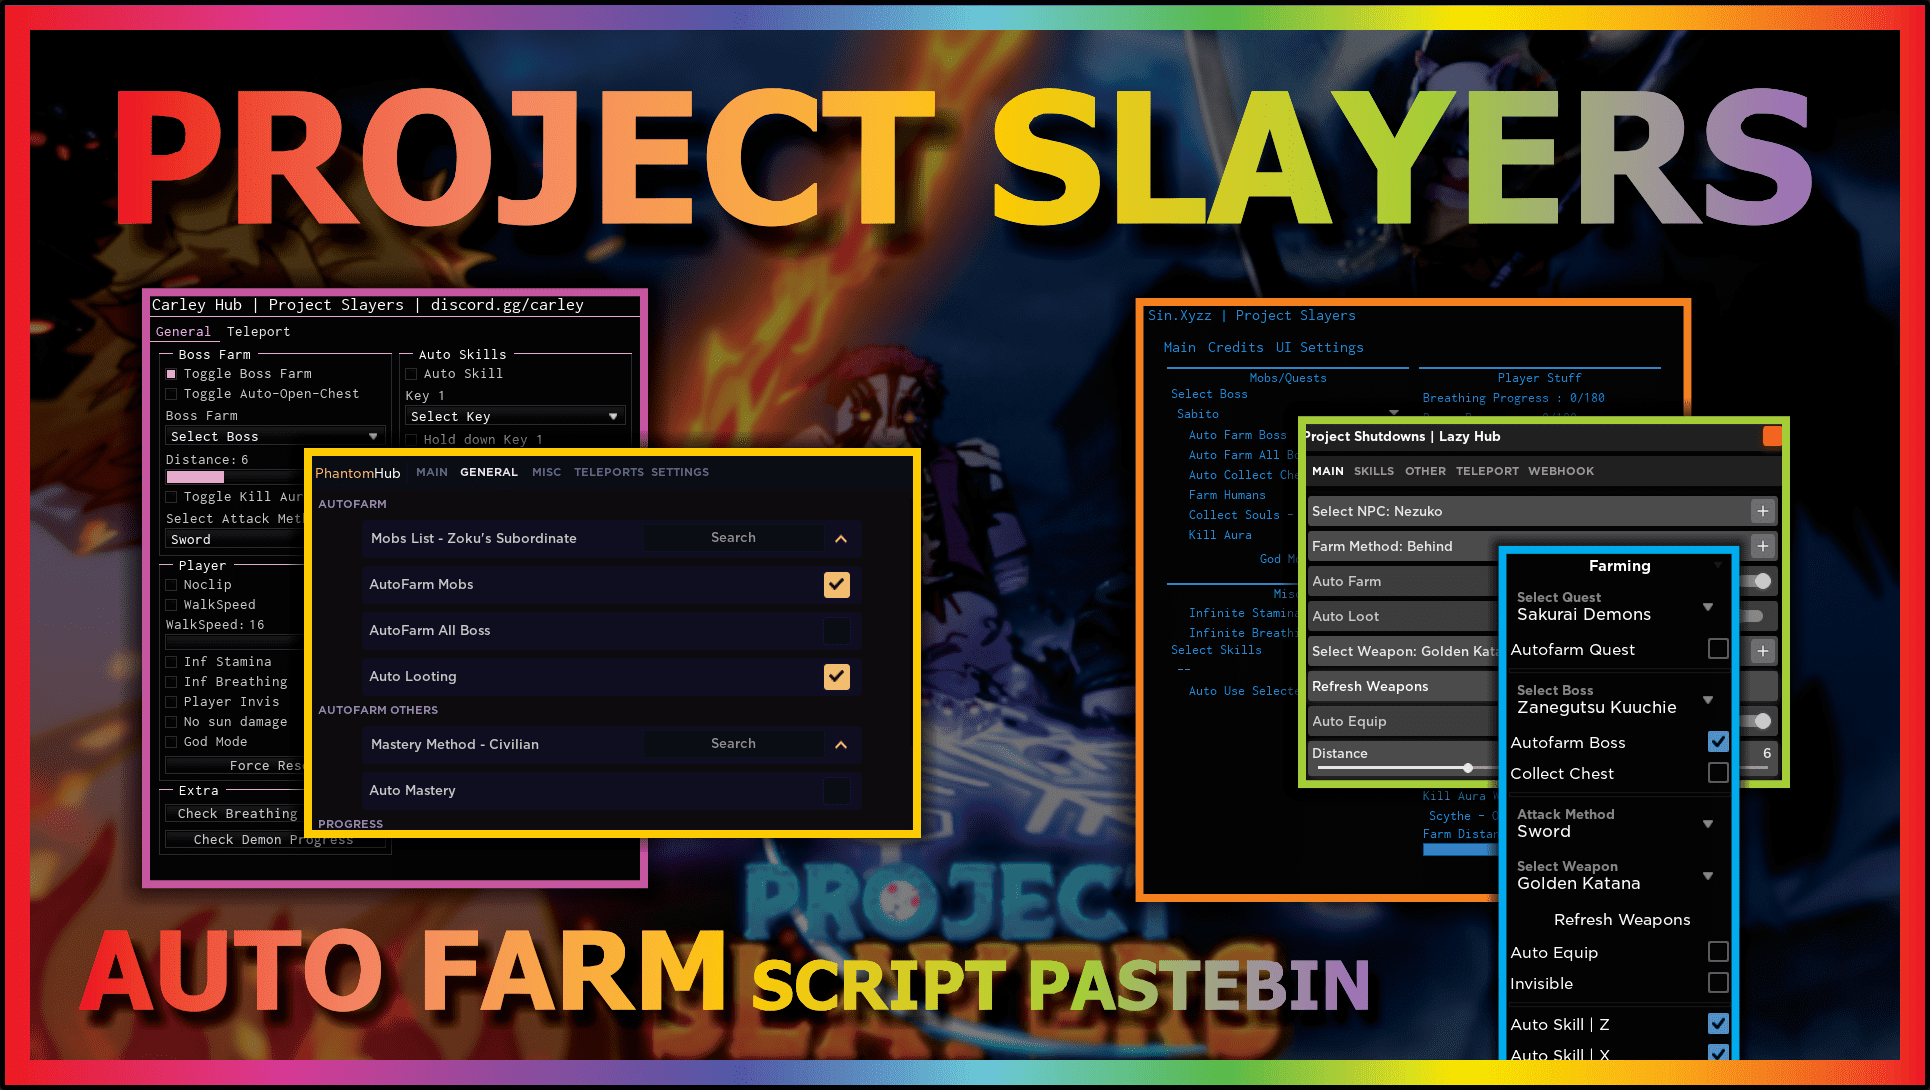 Project Slayers Discord link - how to get access and support